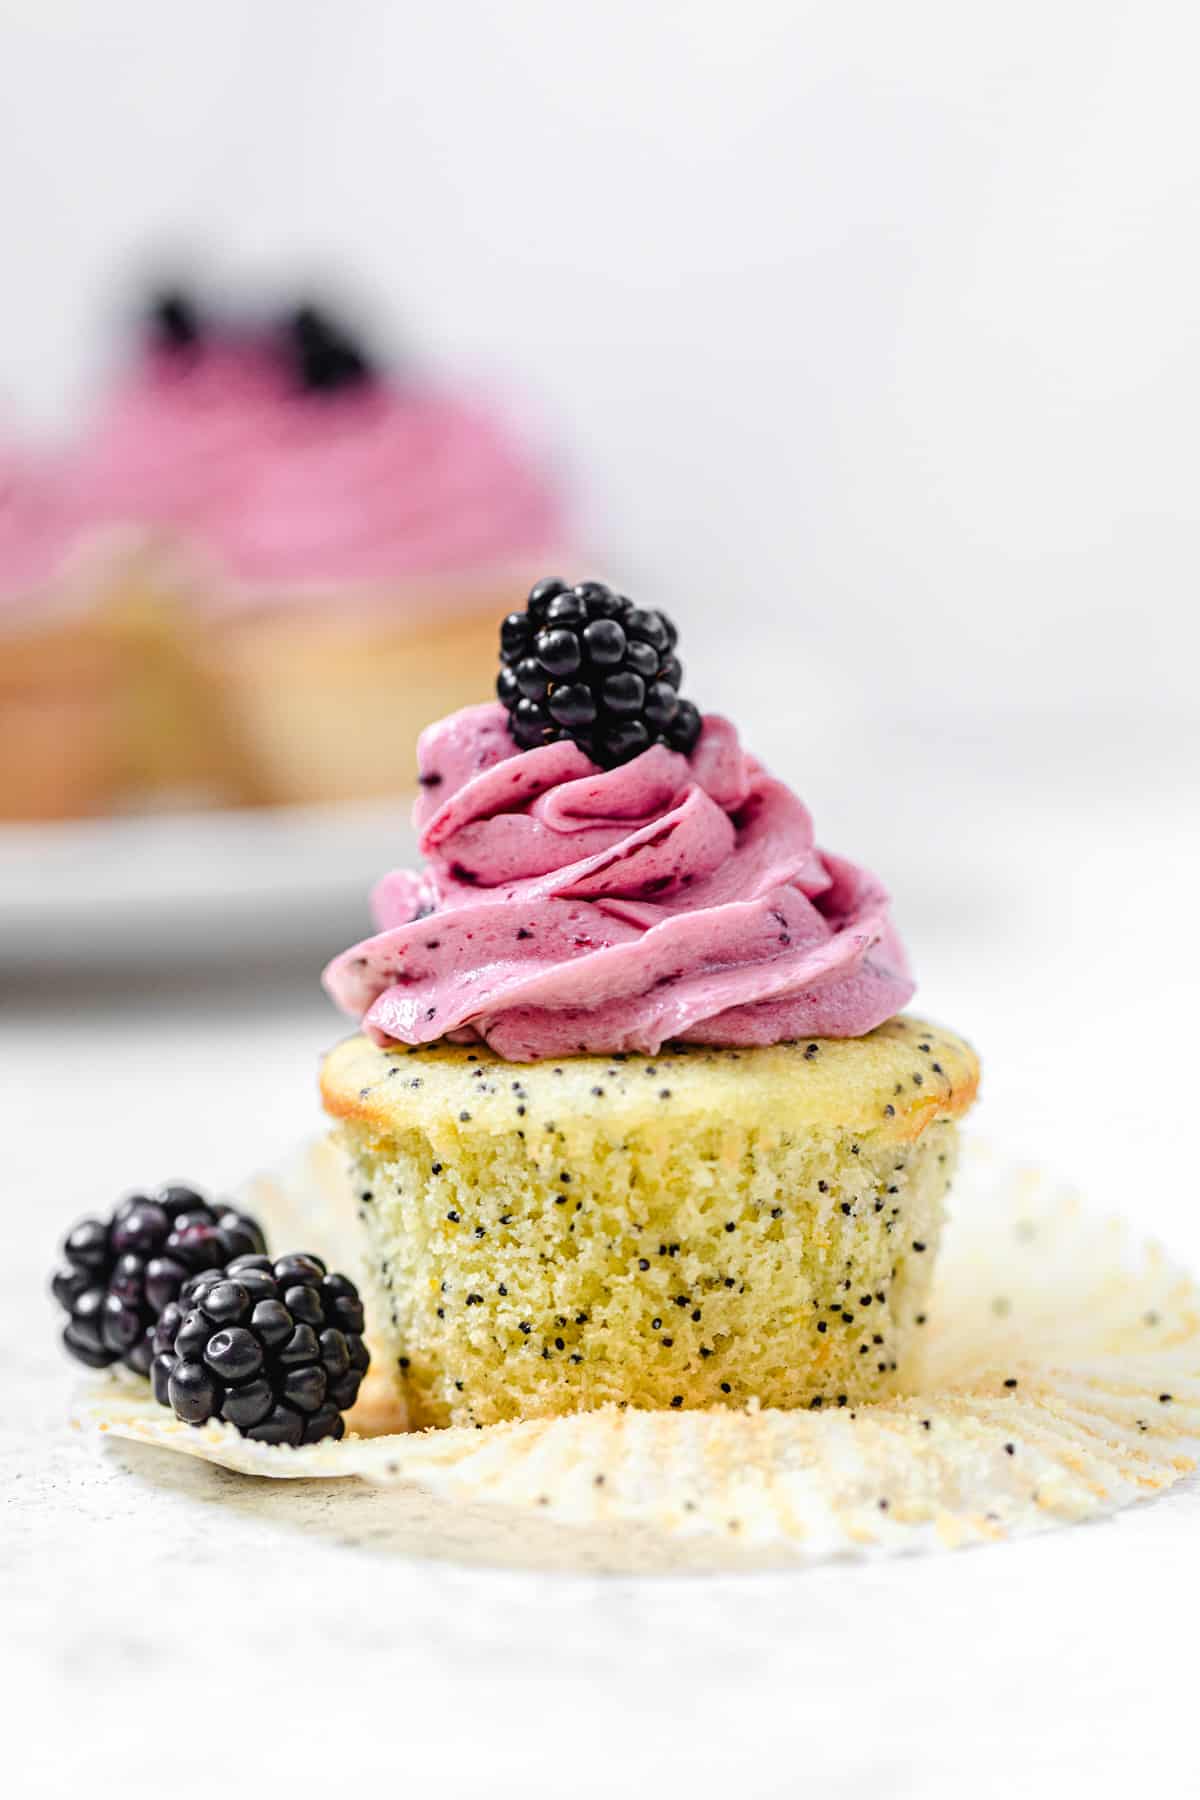 unwrapped cupcake with 2 blackberries next to it